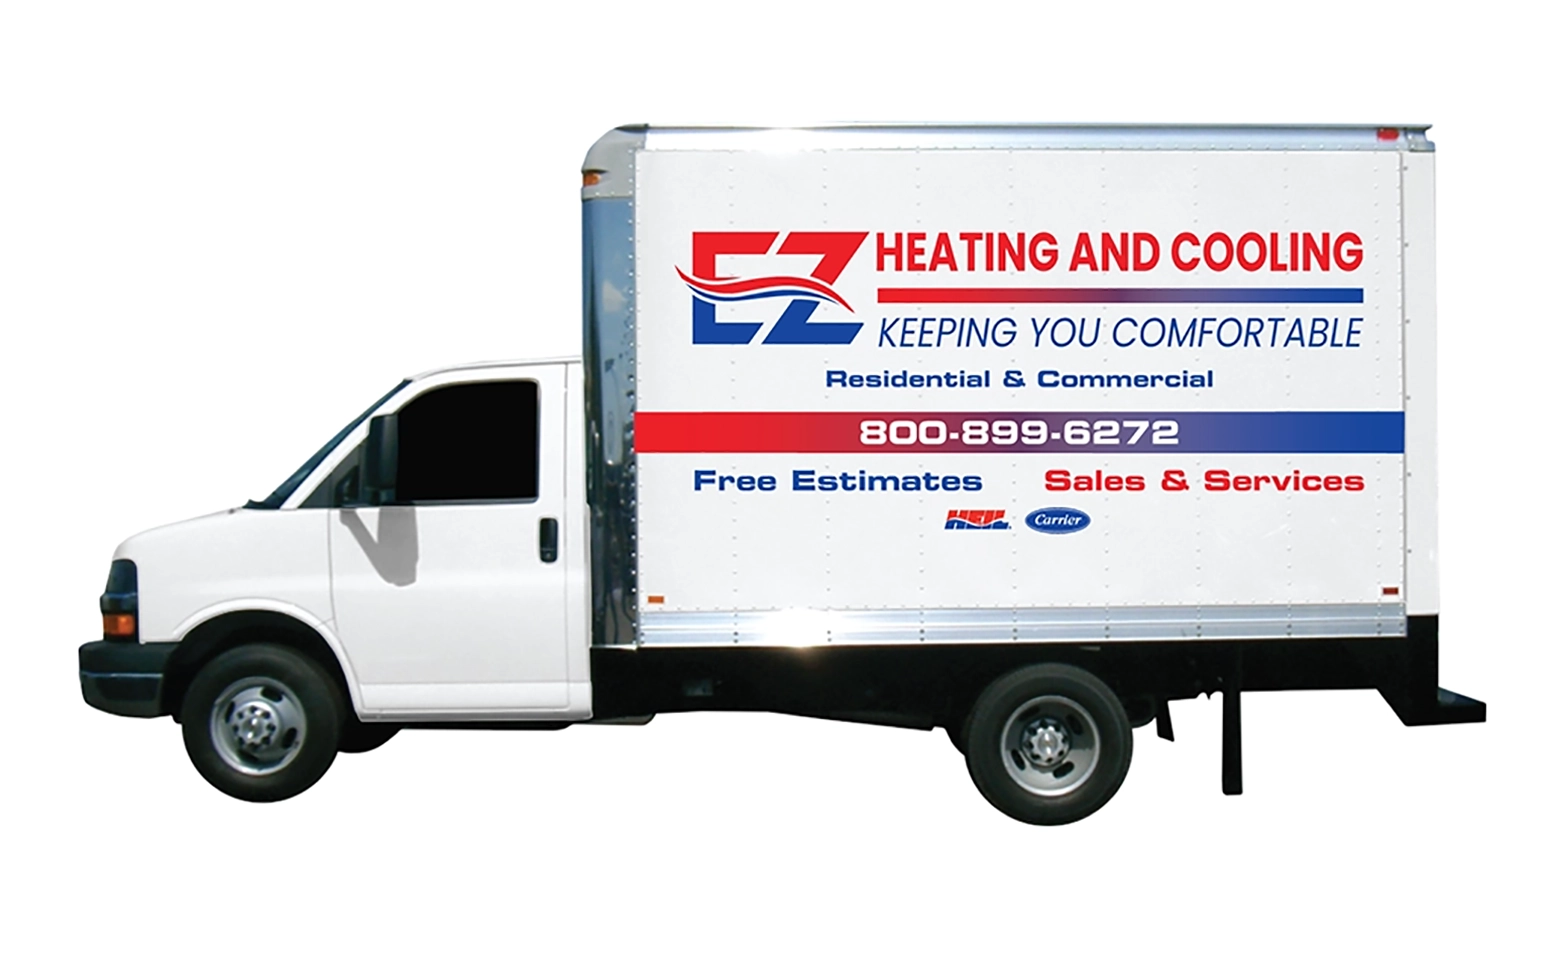 High Coverage Vinyl Graphics Package on 12 Foot Truck: Elevate Your Commercial Vehicle's Appearance